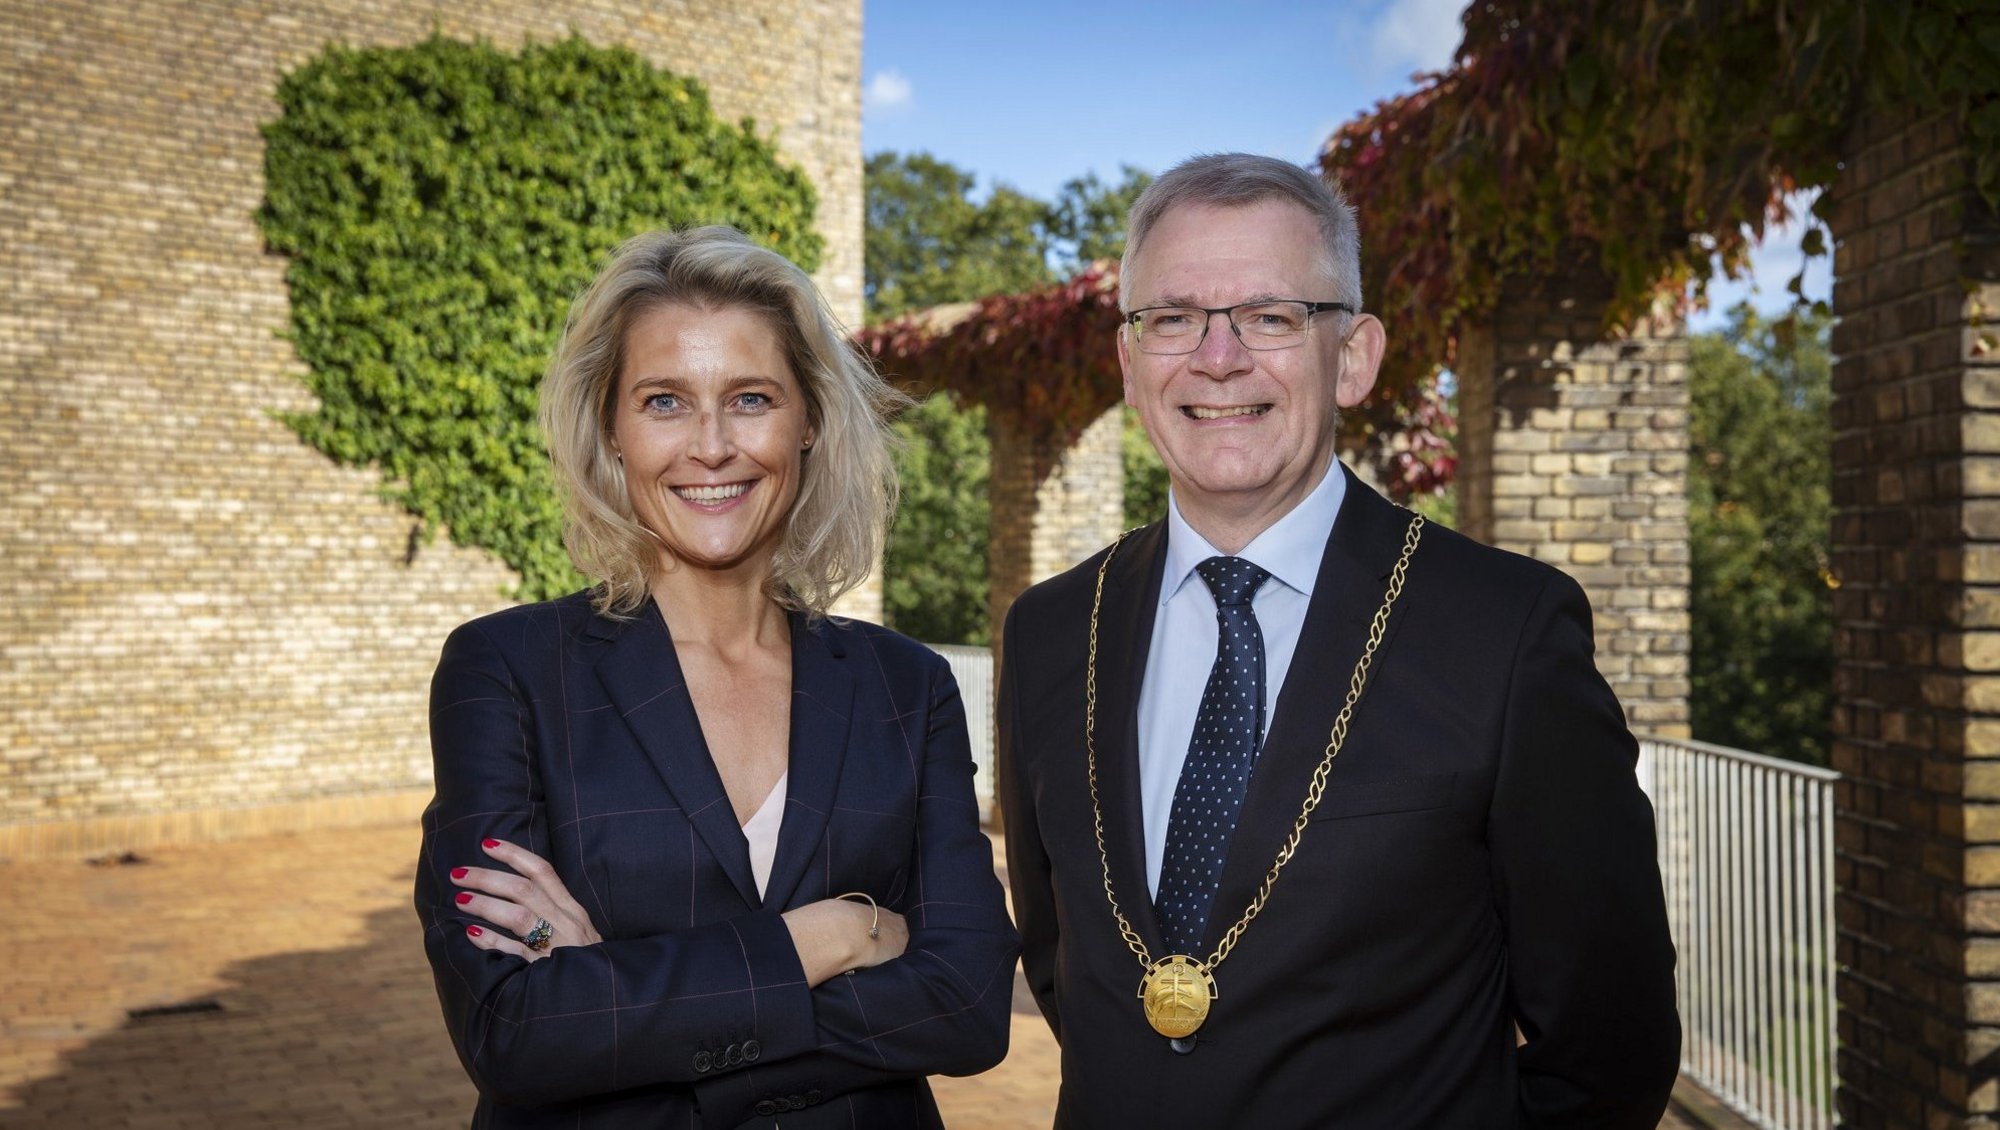 Distinguished alumna 2019 Marianne Dahl with Rector Brian Bech Nielsen